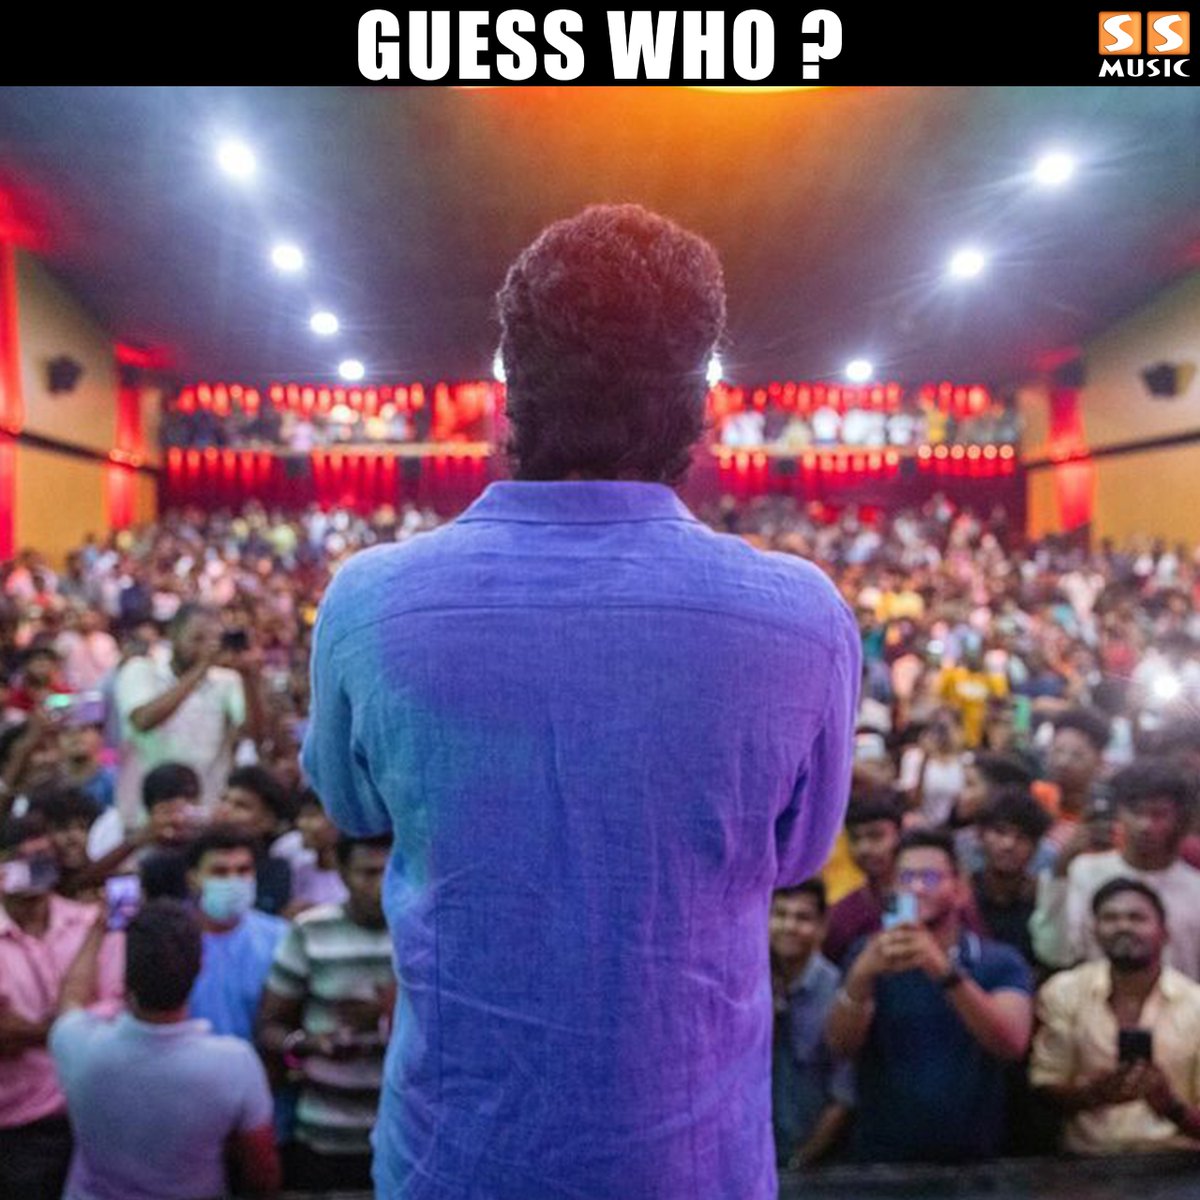 Any Guesses? . #GuessWho #Kollywood #SSMusic